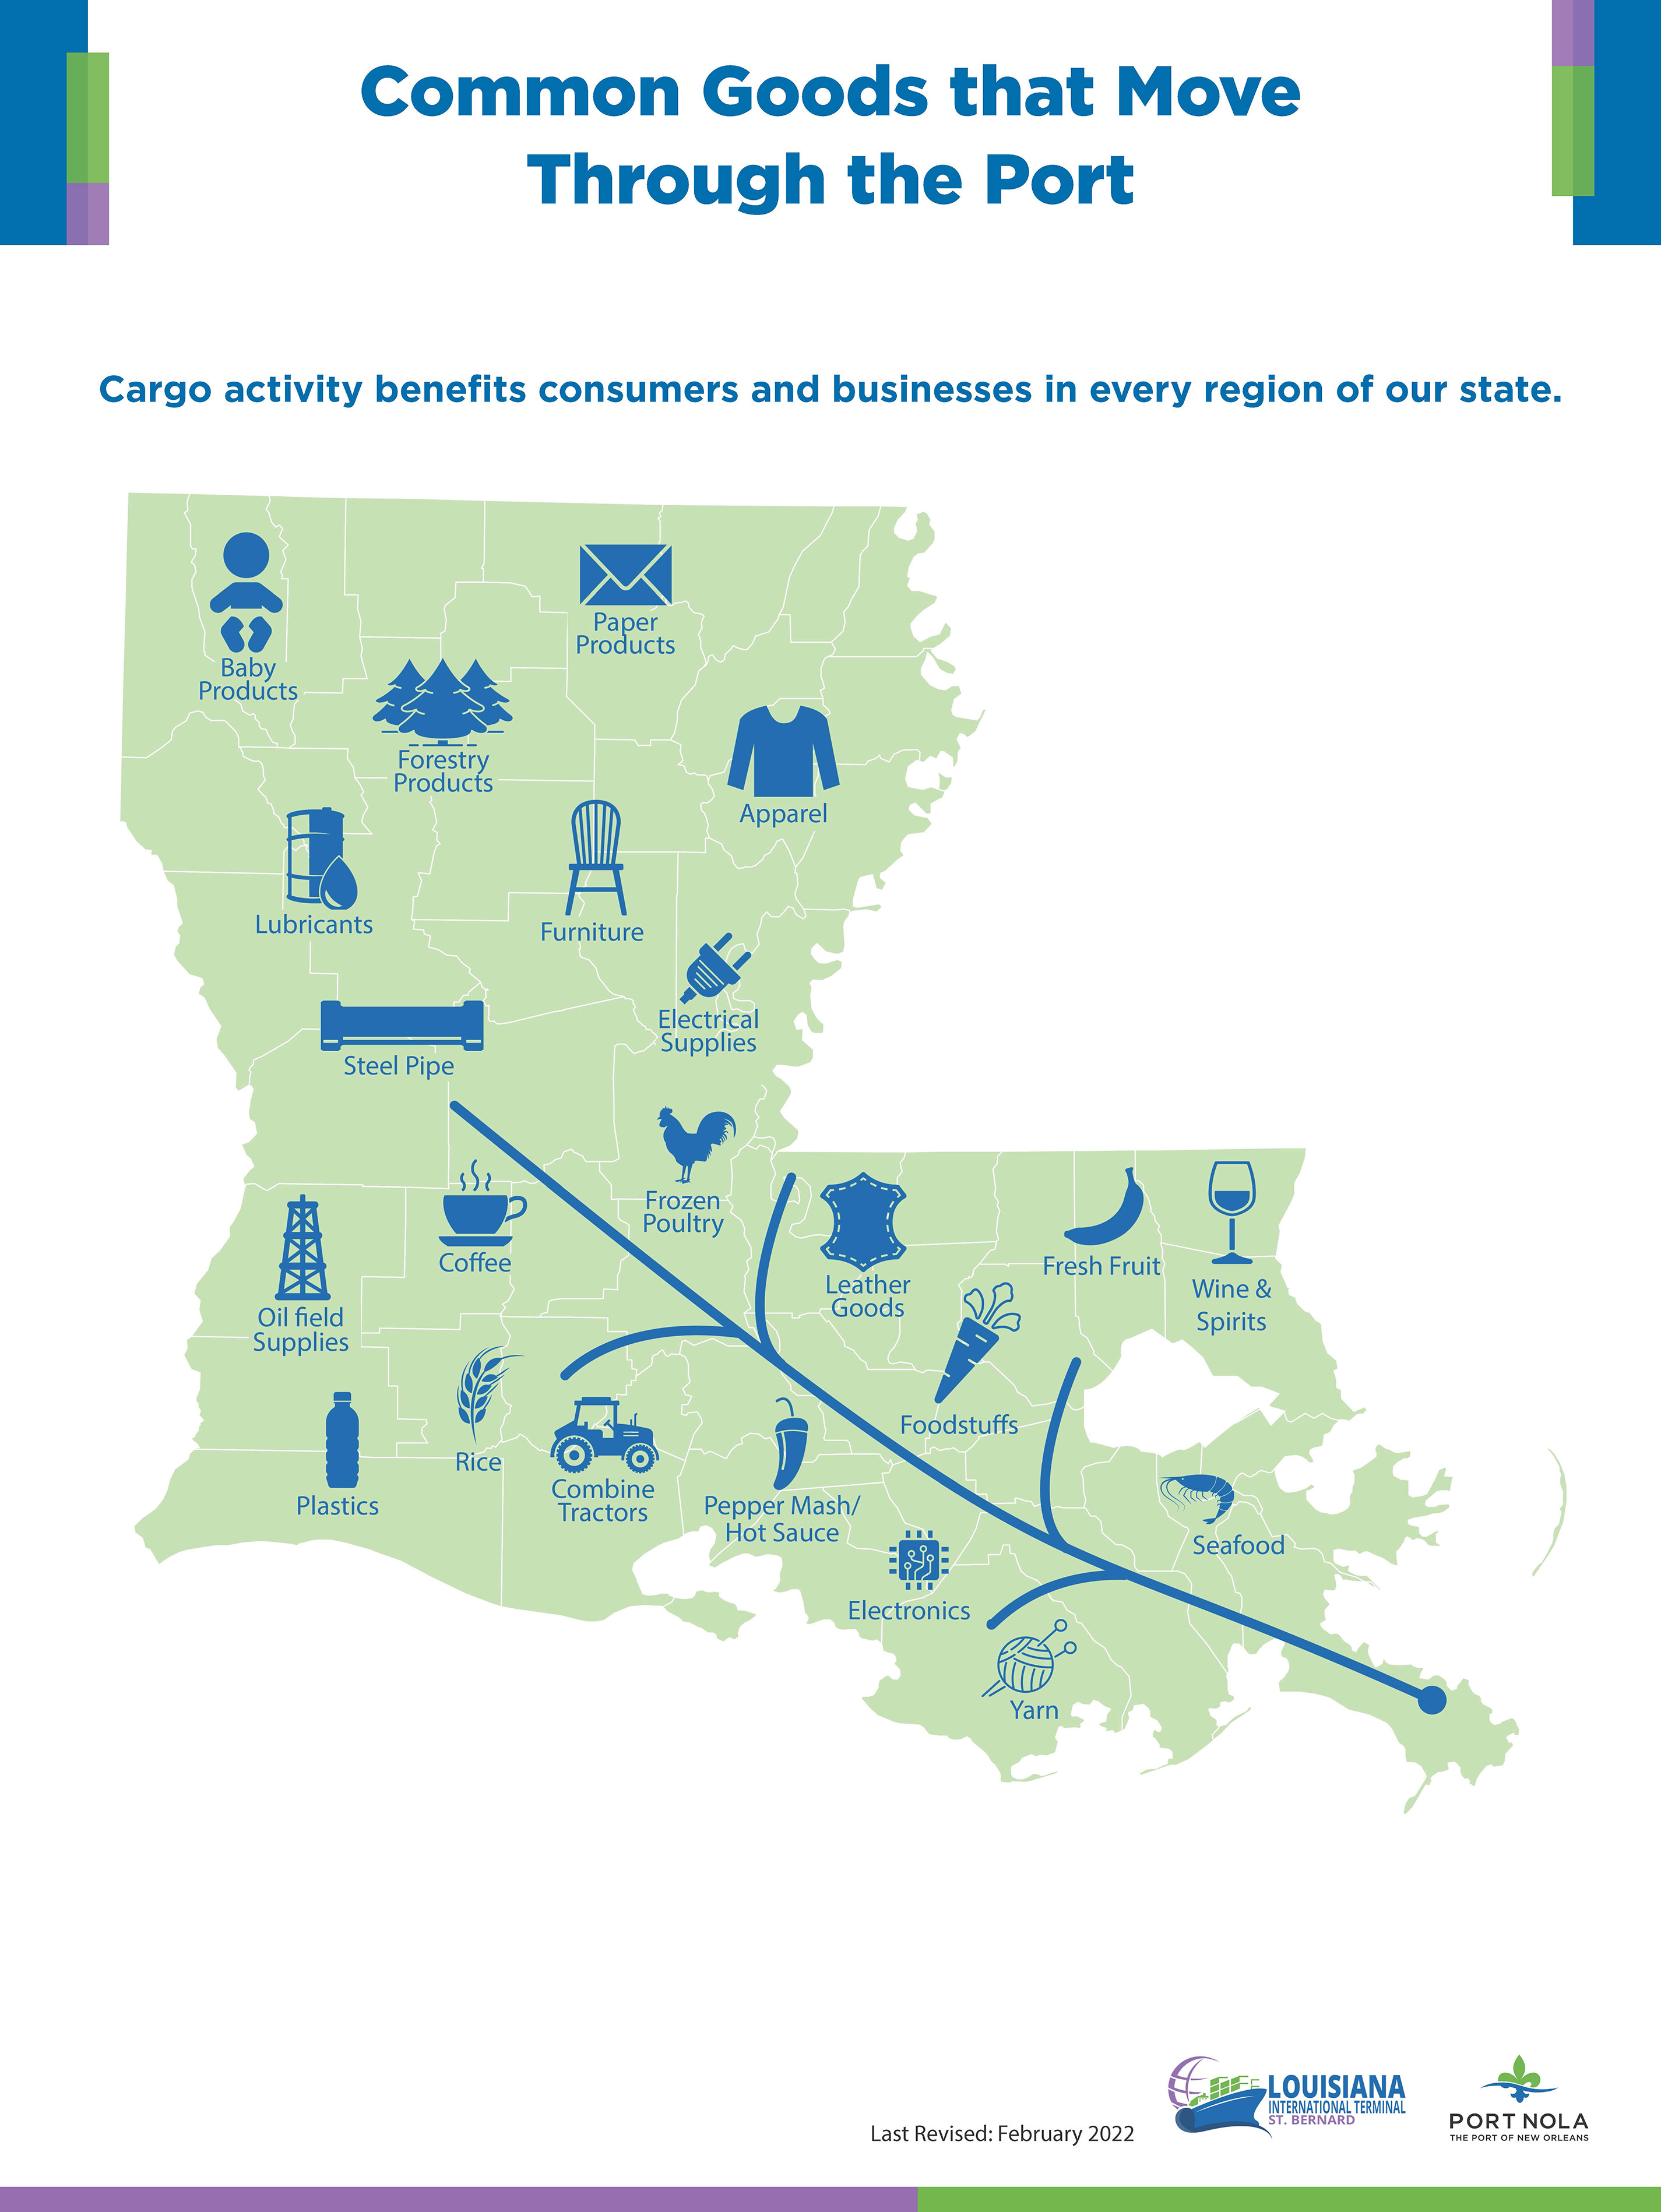 Graphic showing the common Louisiana goods that move through the Port of New Orleans, such as baby products, furniture, apparel, and foodstuffs.